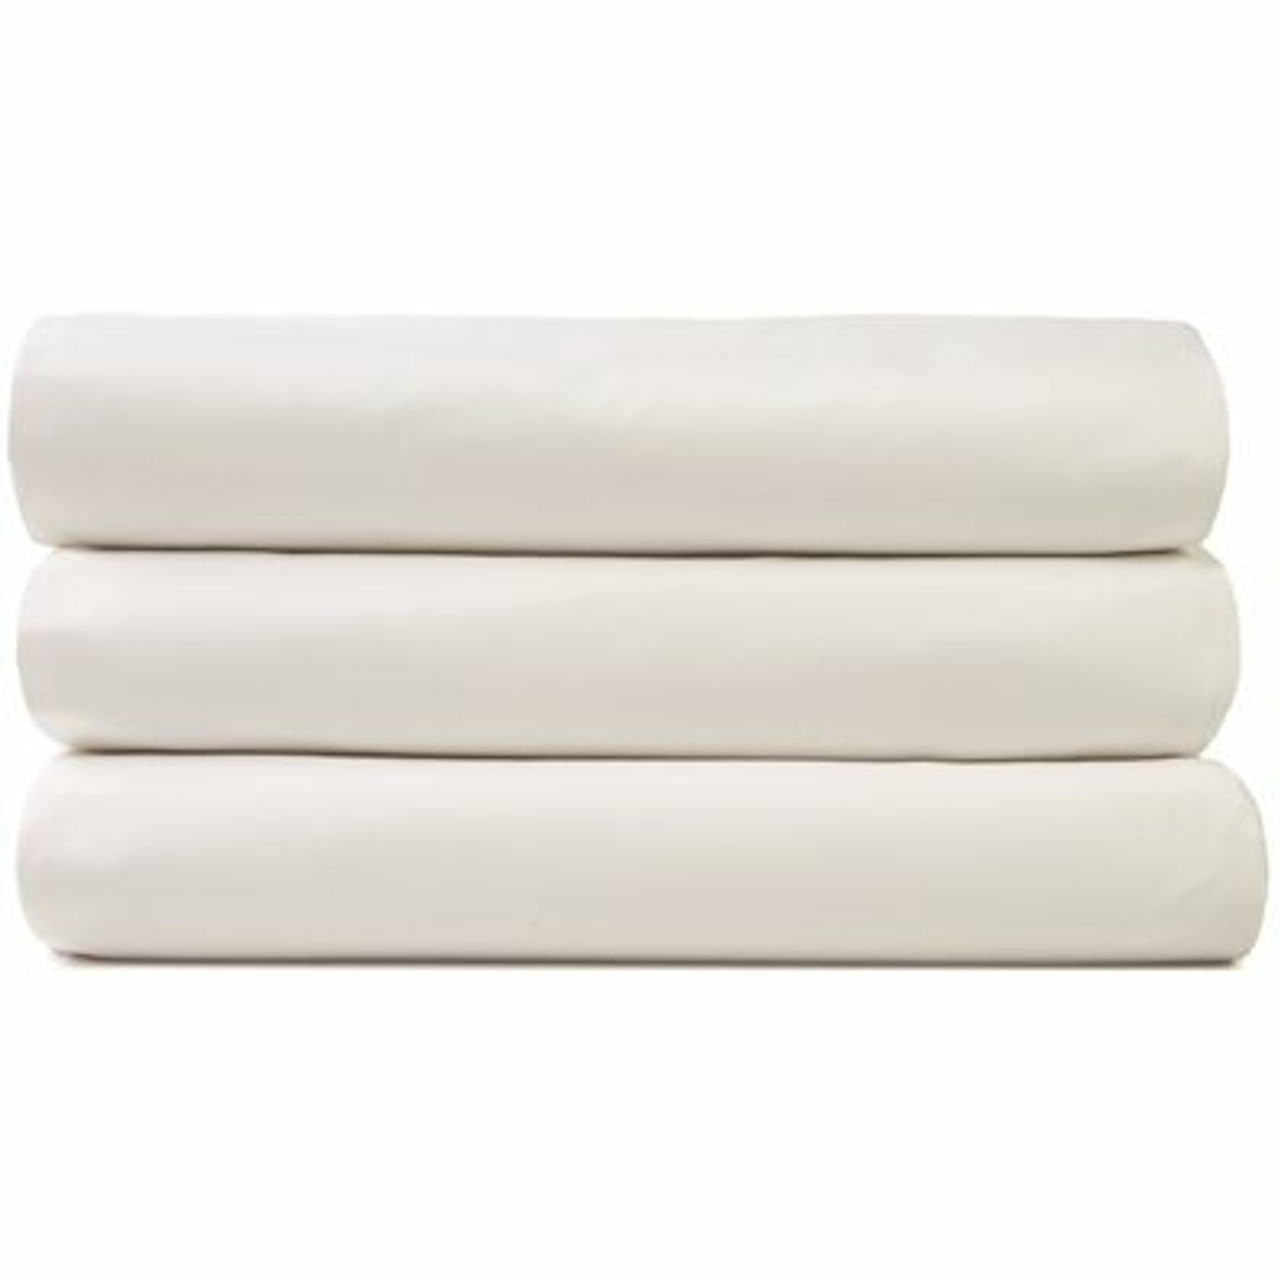 International Trading Co T180 Queen Flat Sheet In White, Case Of 24